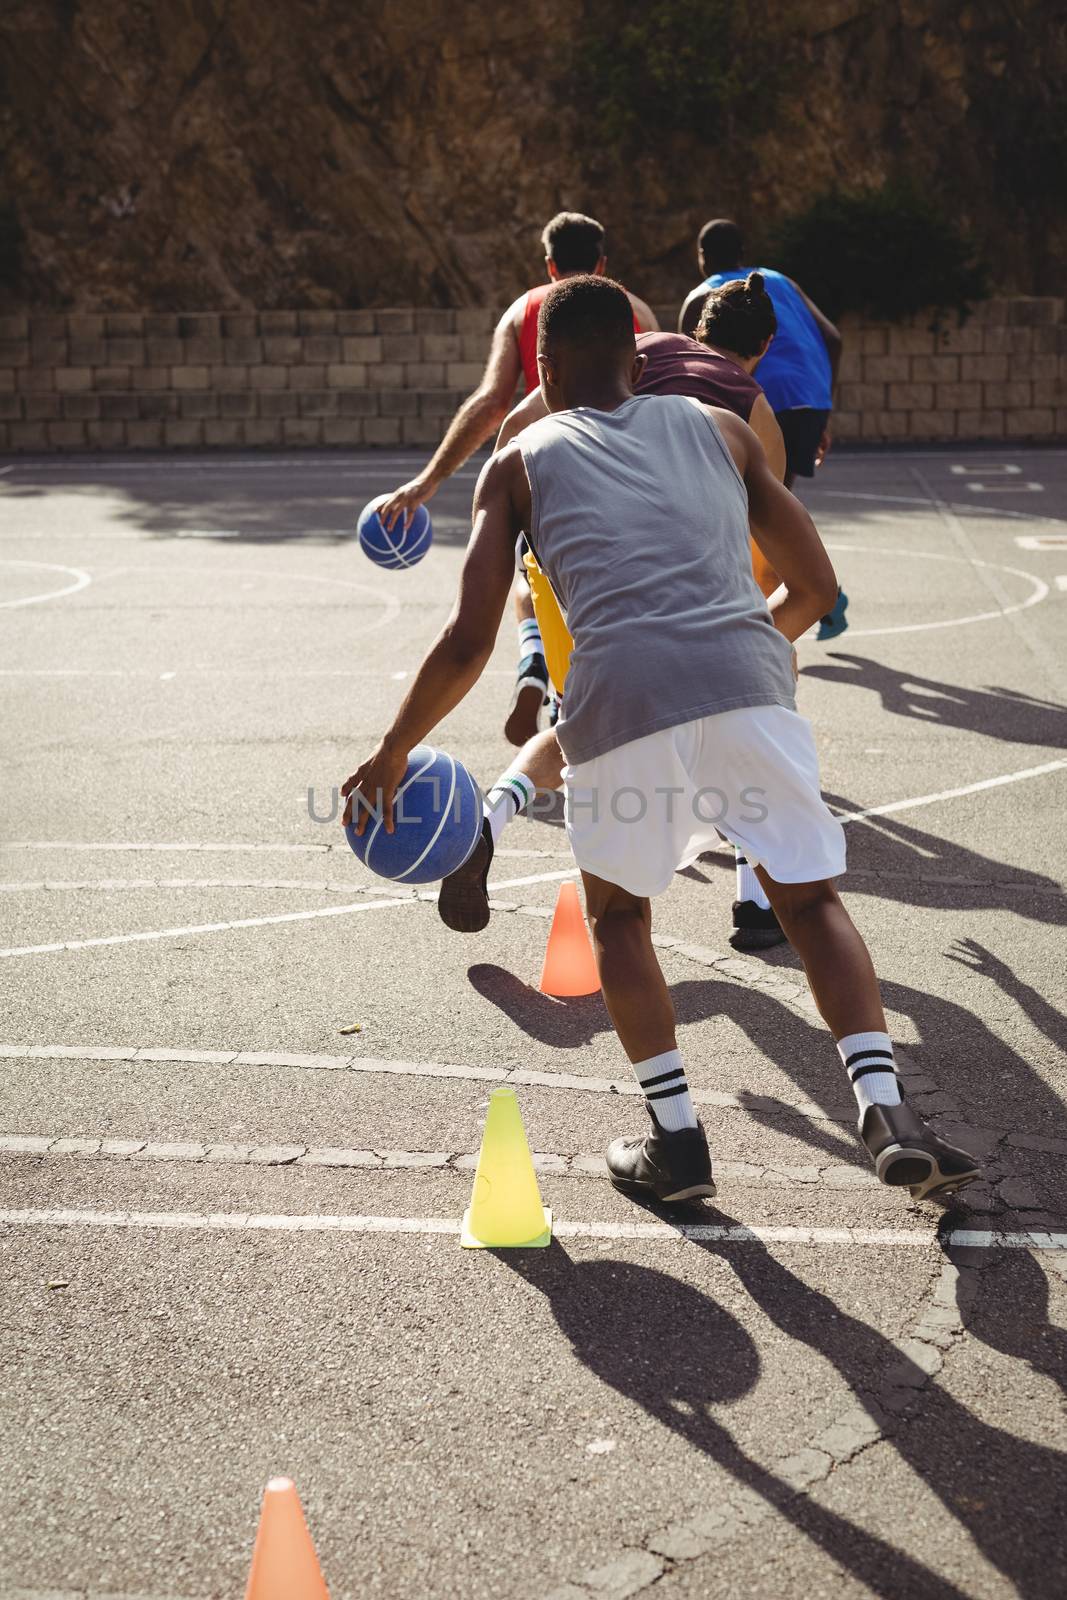 Basketball players practicing dribbling drill by Wavebreakmedia